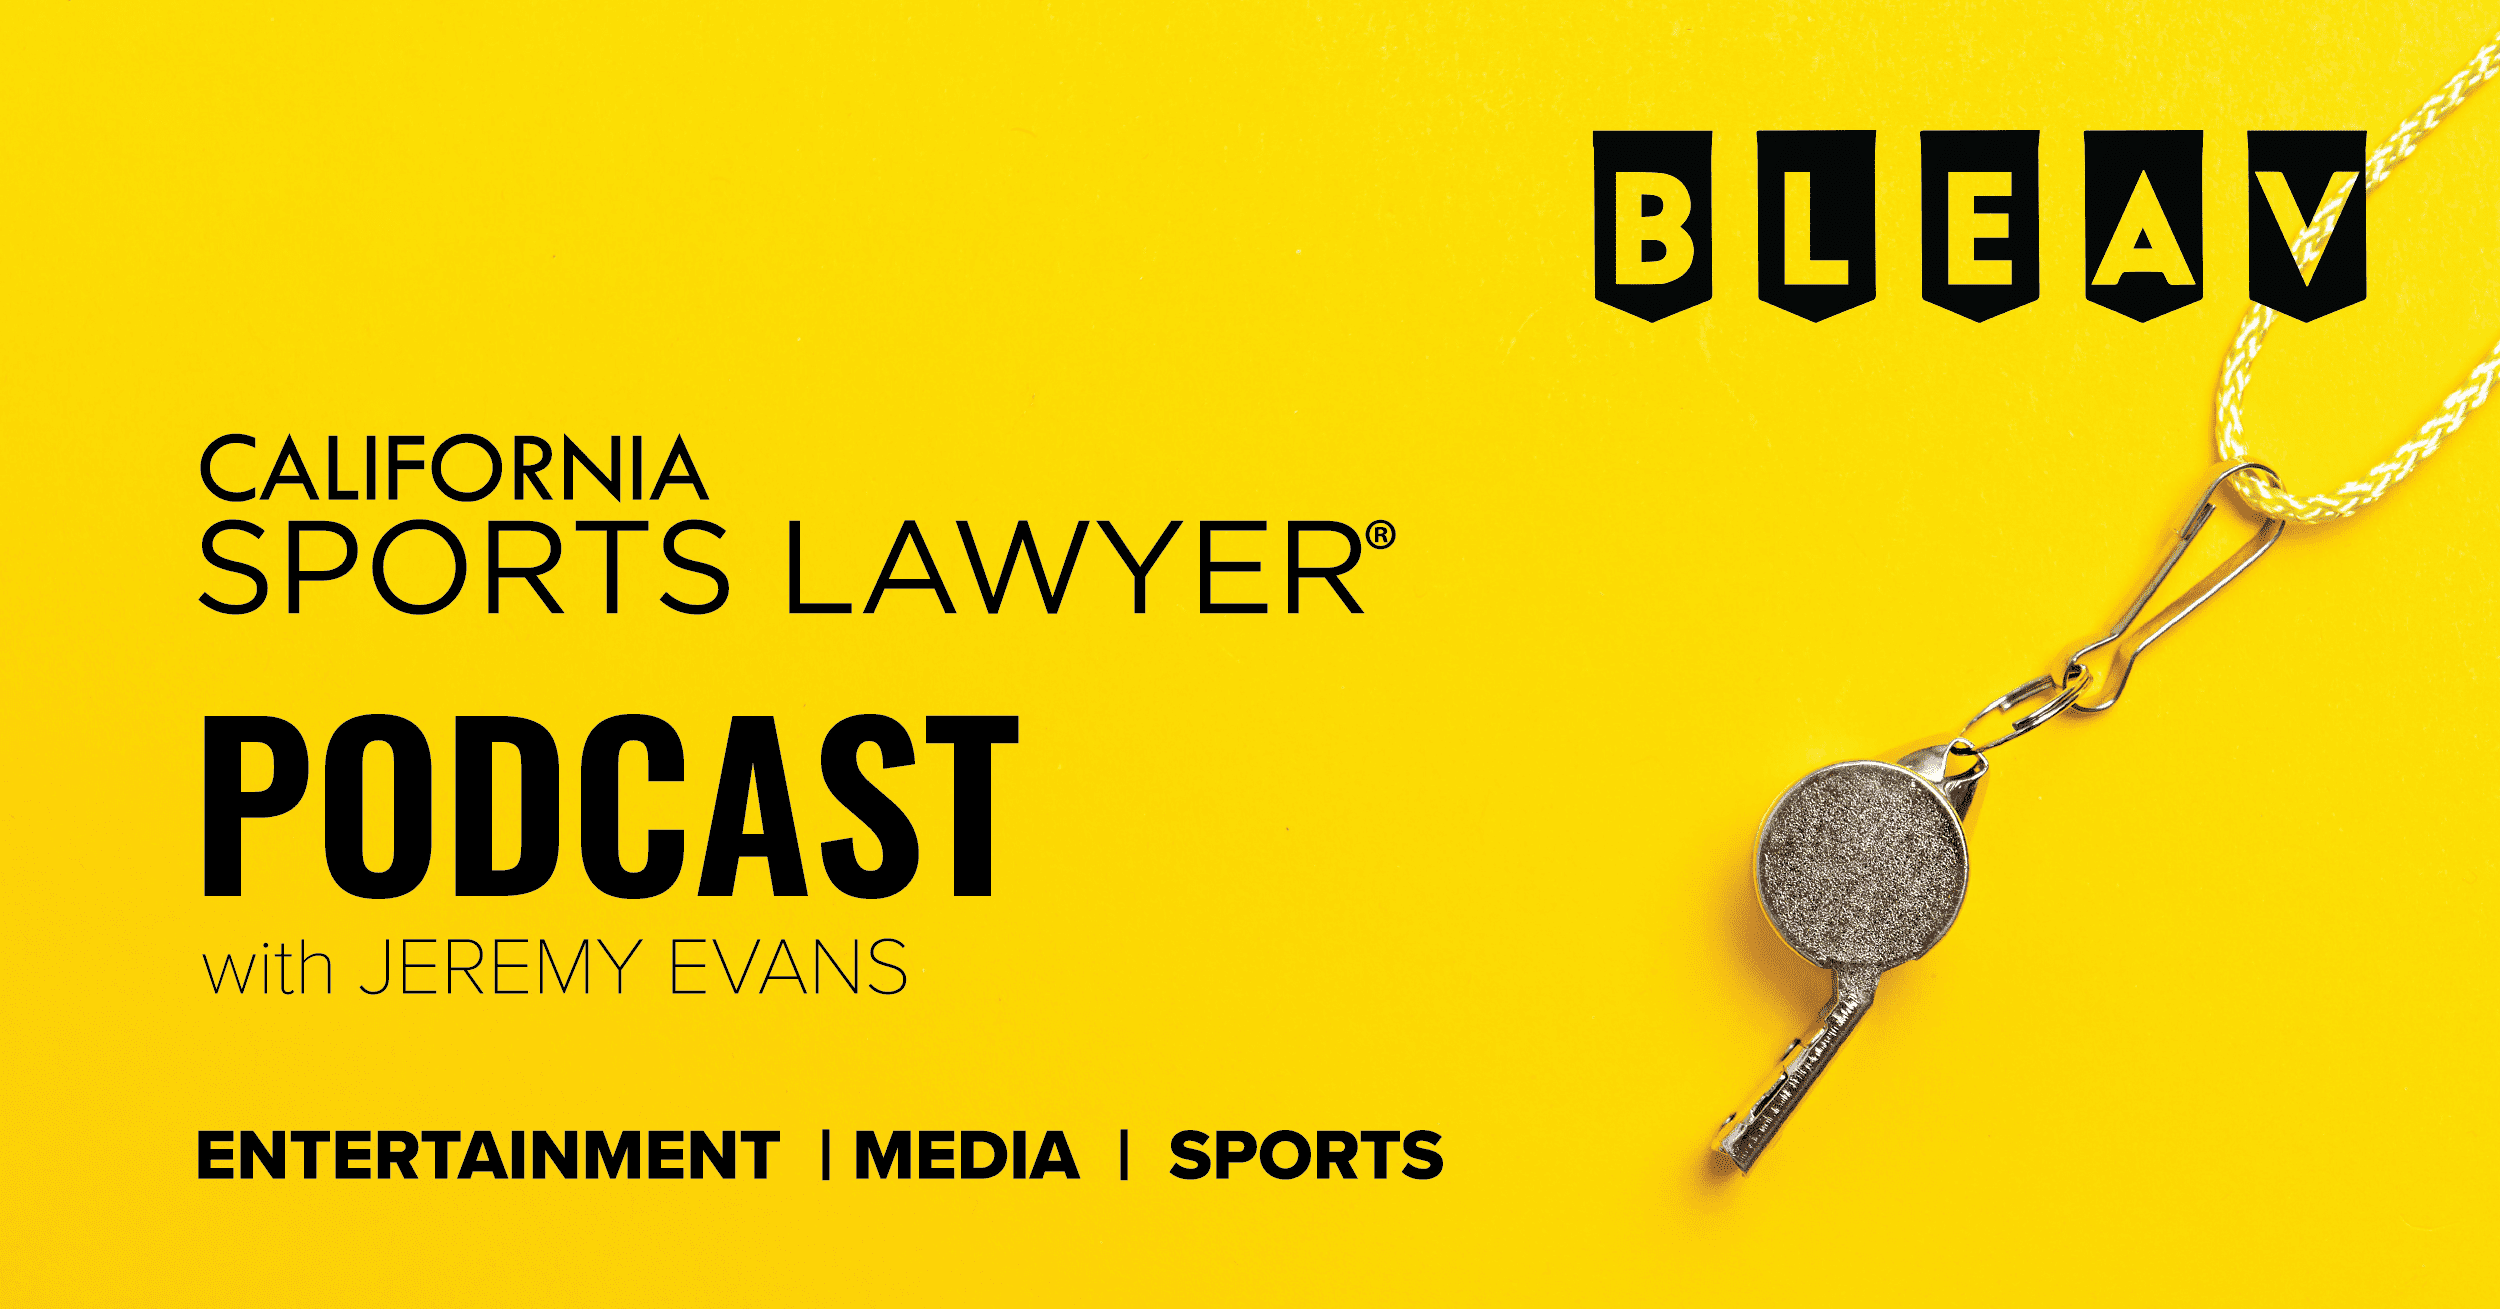 California Sports Lawyer® Podcast with Jeremy Evans: 30+ Minutes of Fame w/ Kyle Day, VP and General Manager, Spokane Indians Baseball Club (MiLB)